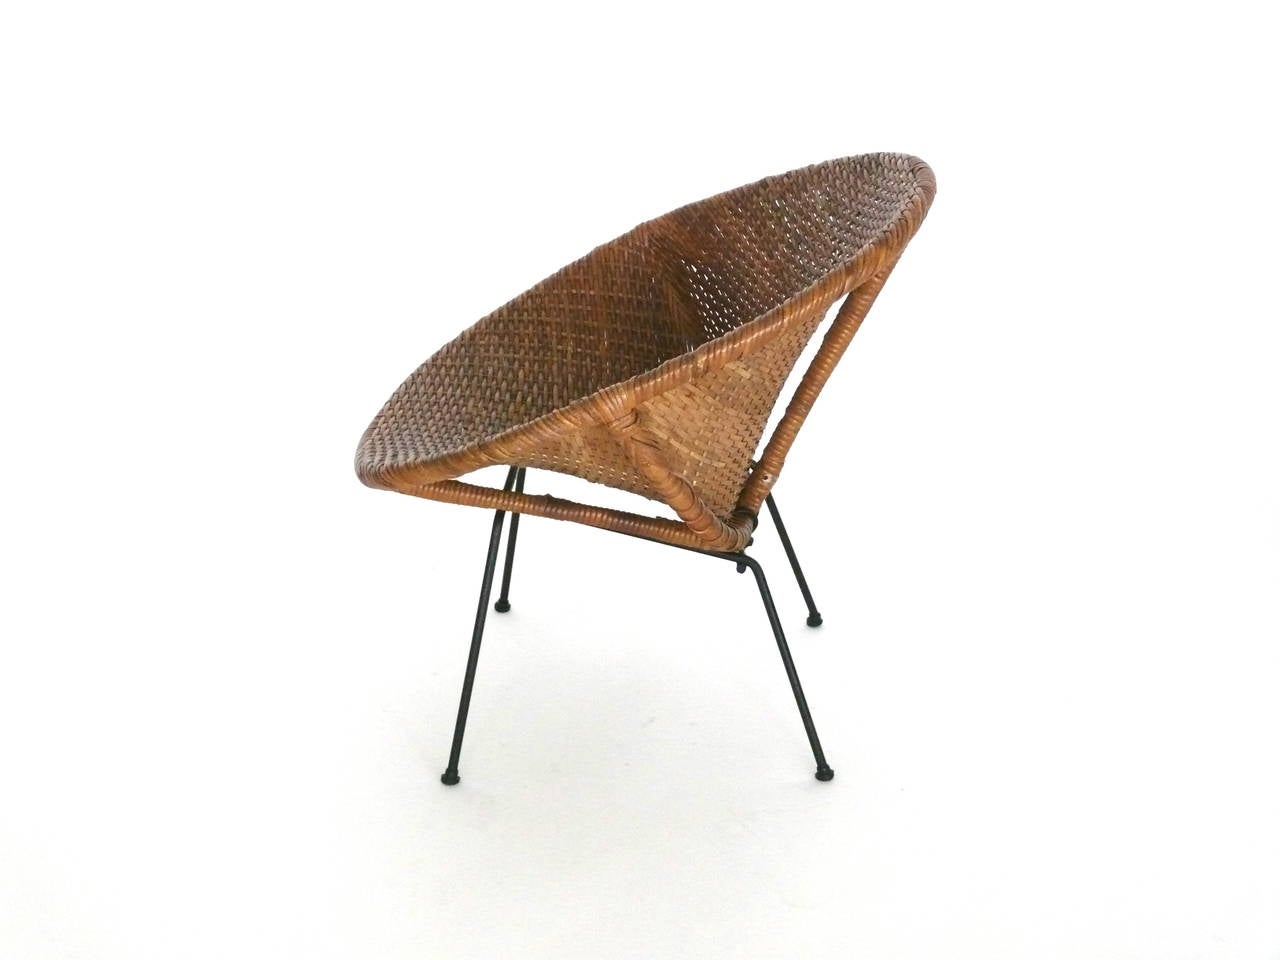 Wicker and Iron Scoop Chair 1